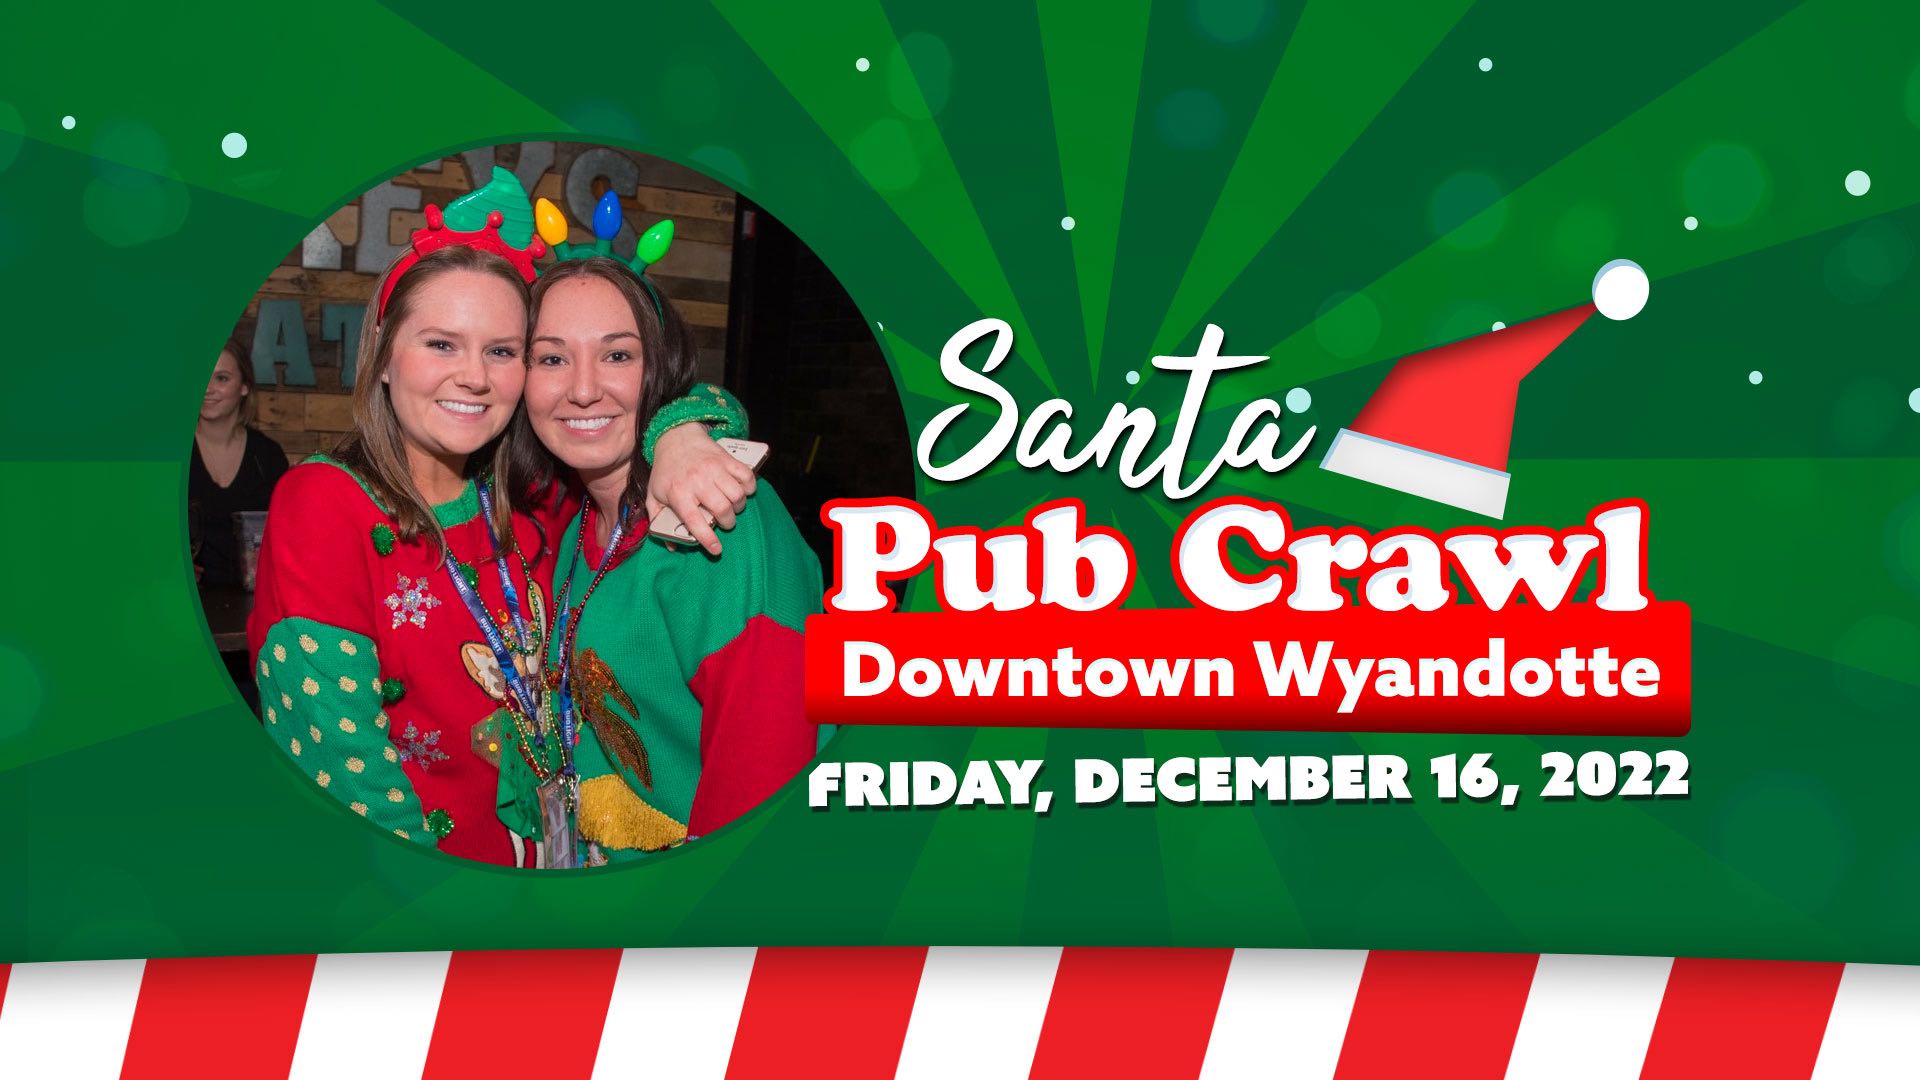 Santa Pub Crawl in Downtown Wyandotte; Friday December 16, 2022 featuring image of two women with Christmas sweaters and fun headbands